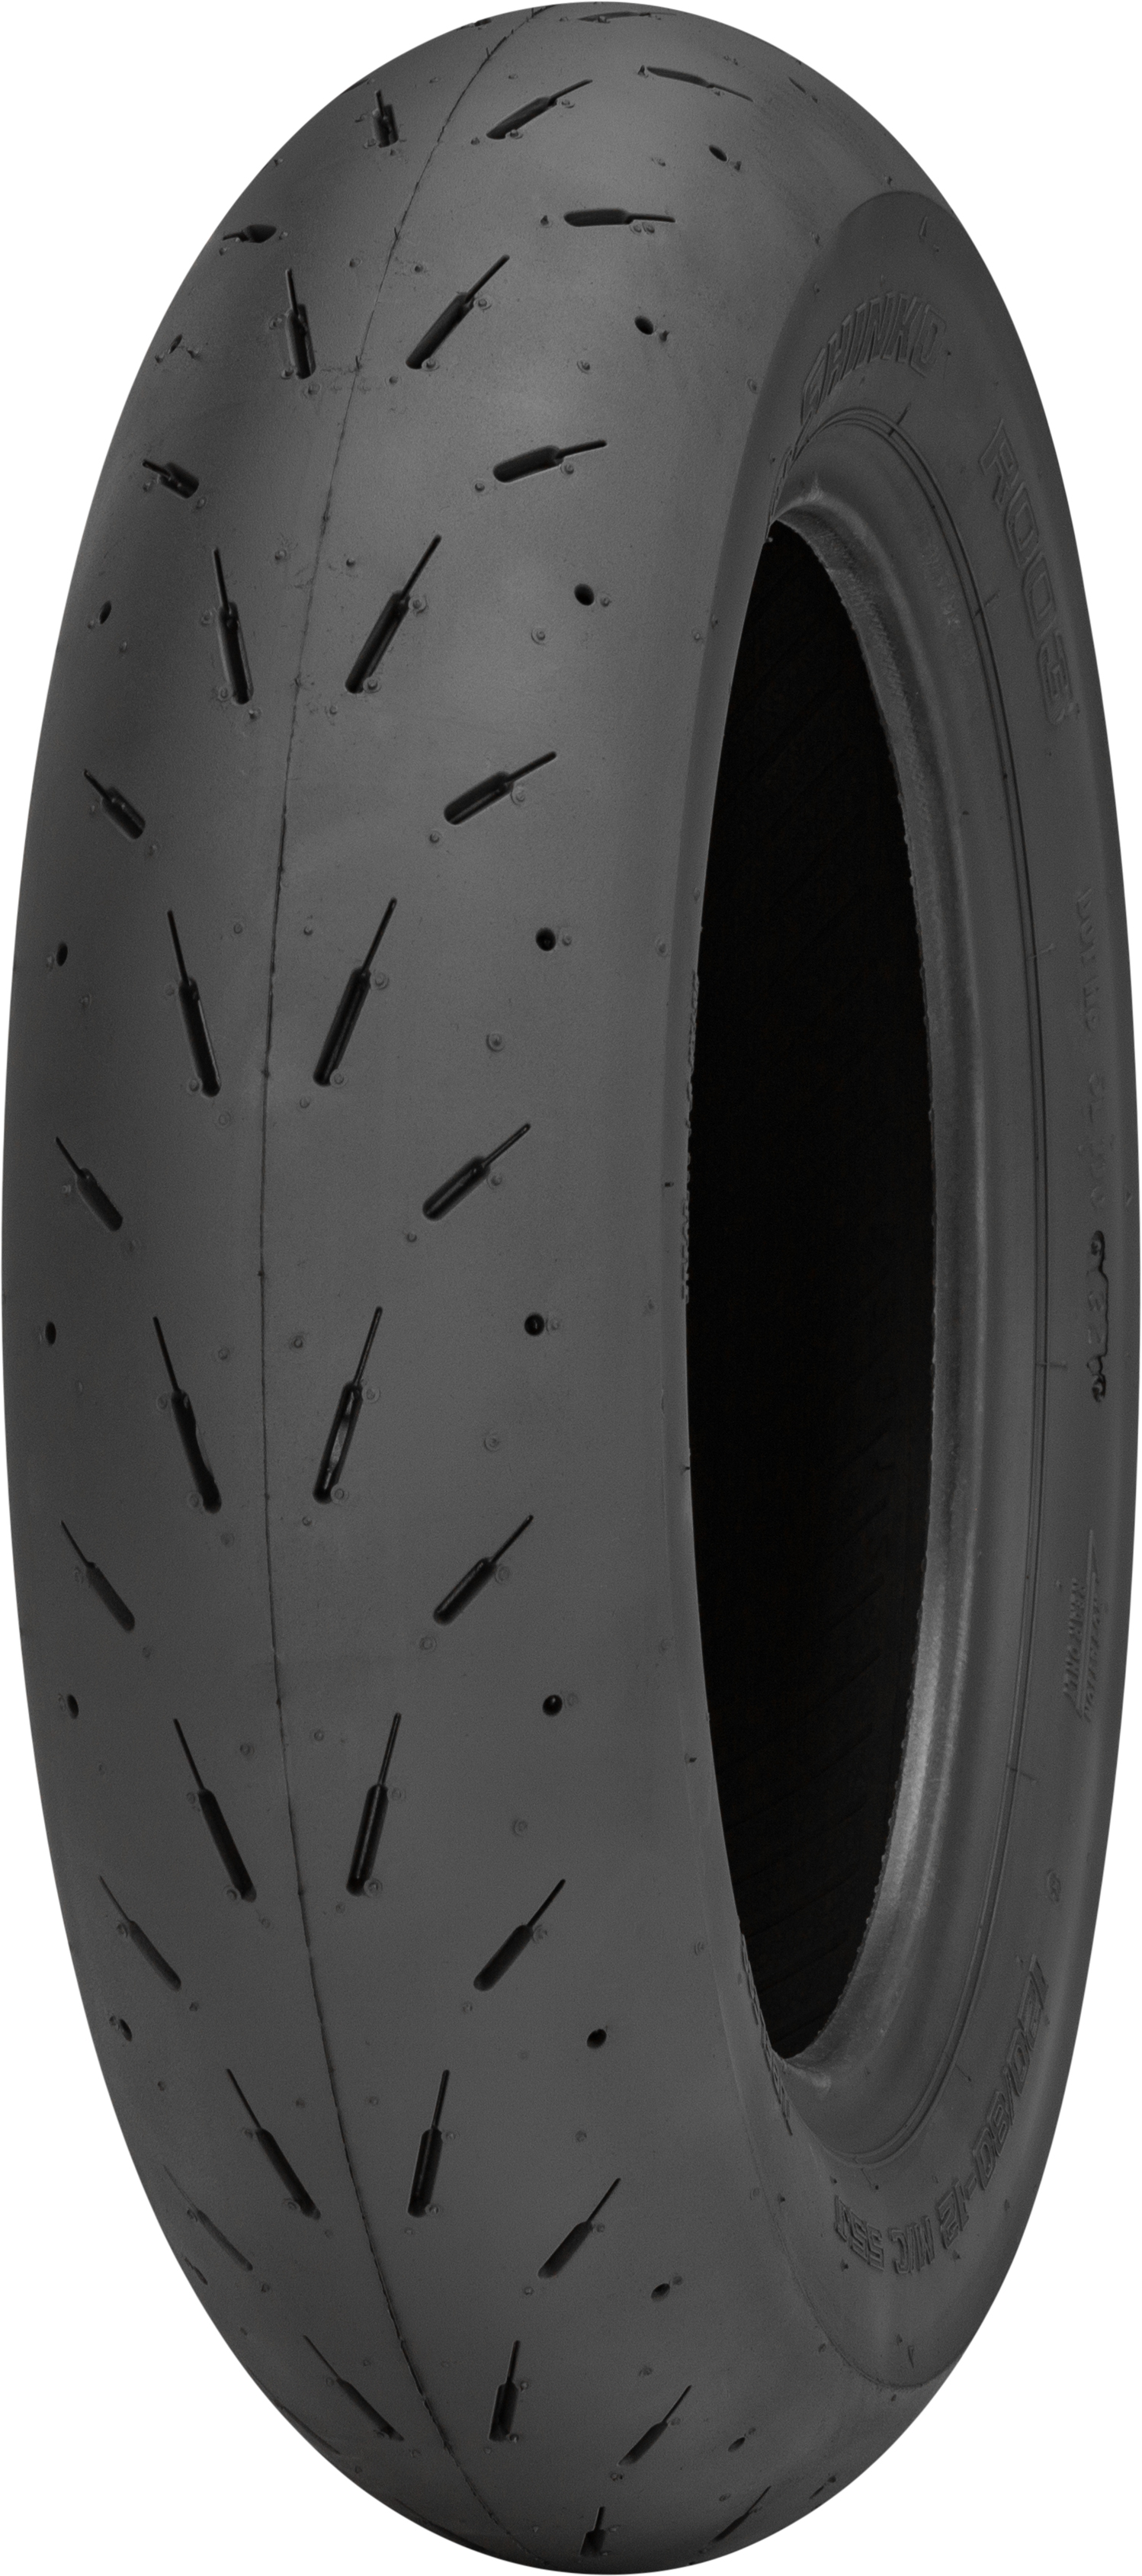 Medium Compound 120/80-12 Rear Tire - SR003 "Stealth" 55J - The Ultimate DOT Legal Scooter & Mini Racing Tire - Click Image to Close